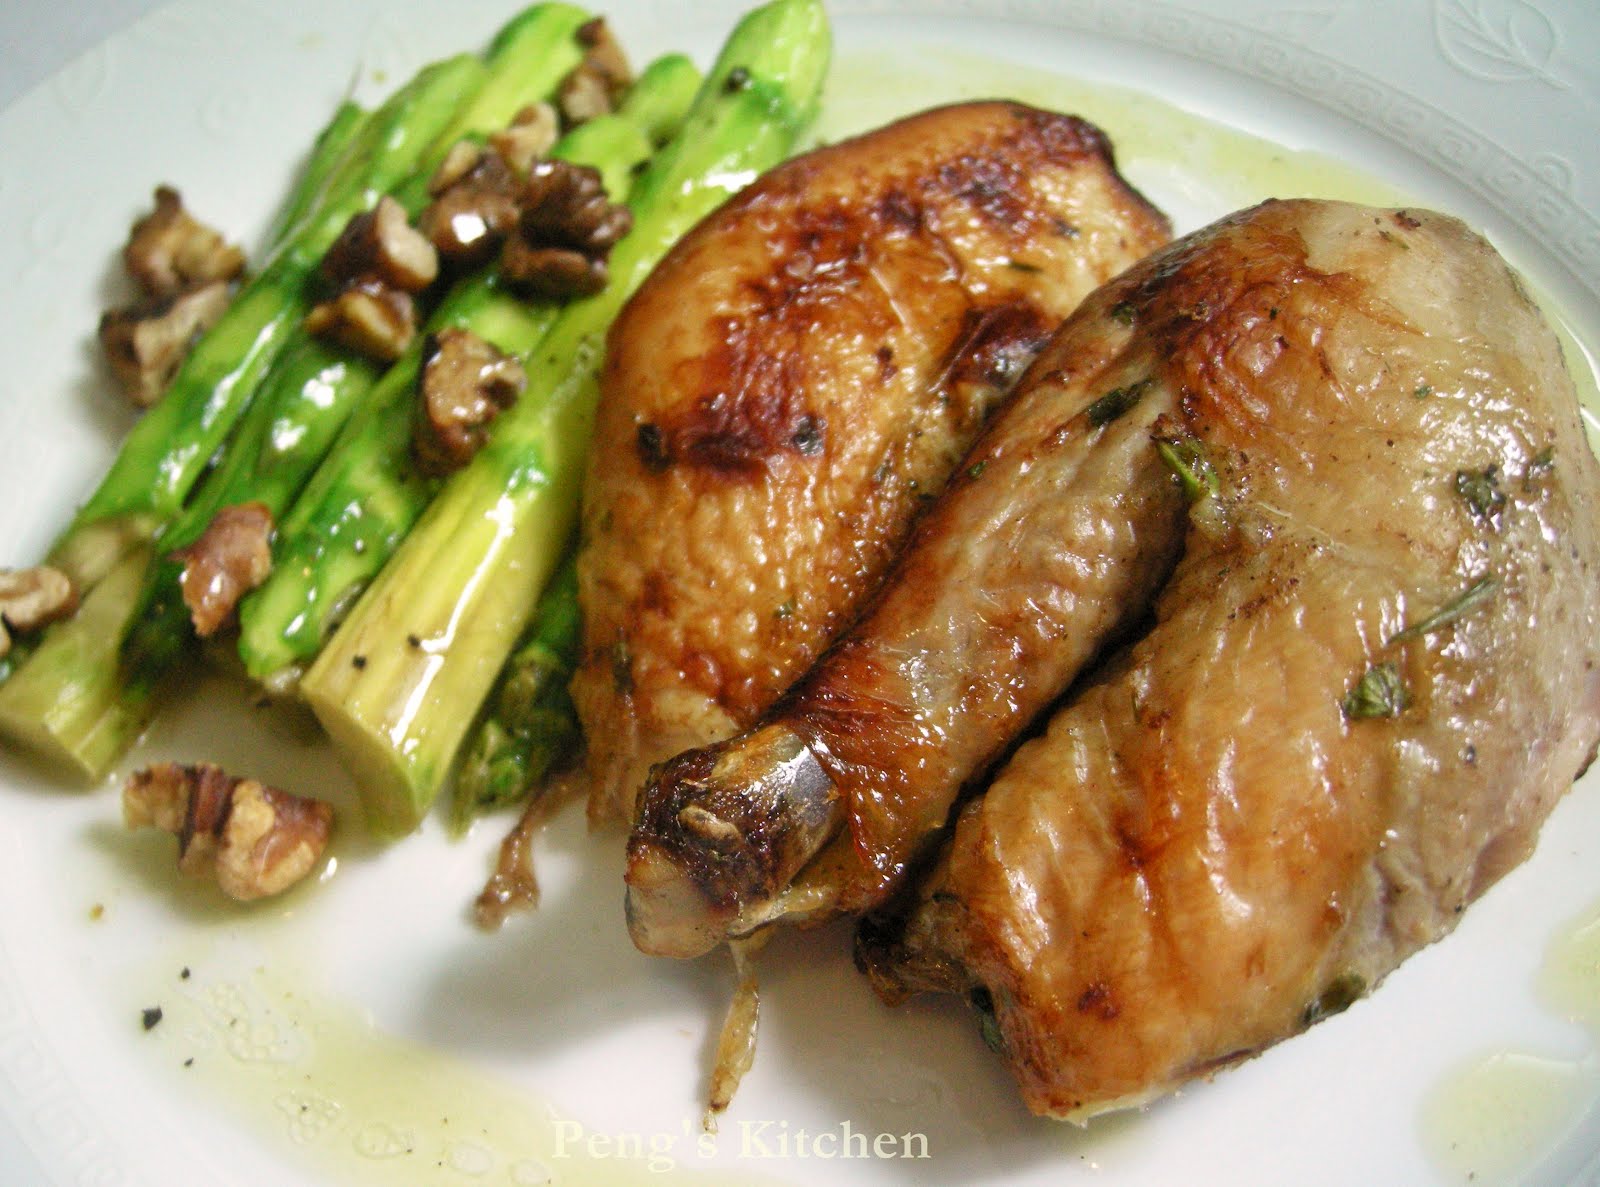 Peng's Kitchen: Roasted Coriander Chicken with Baked Asparagus ...